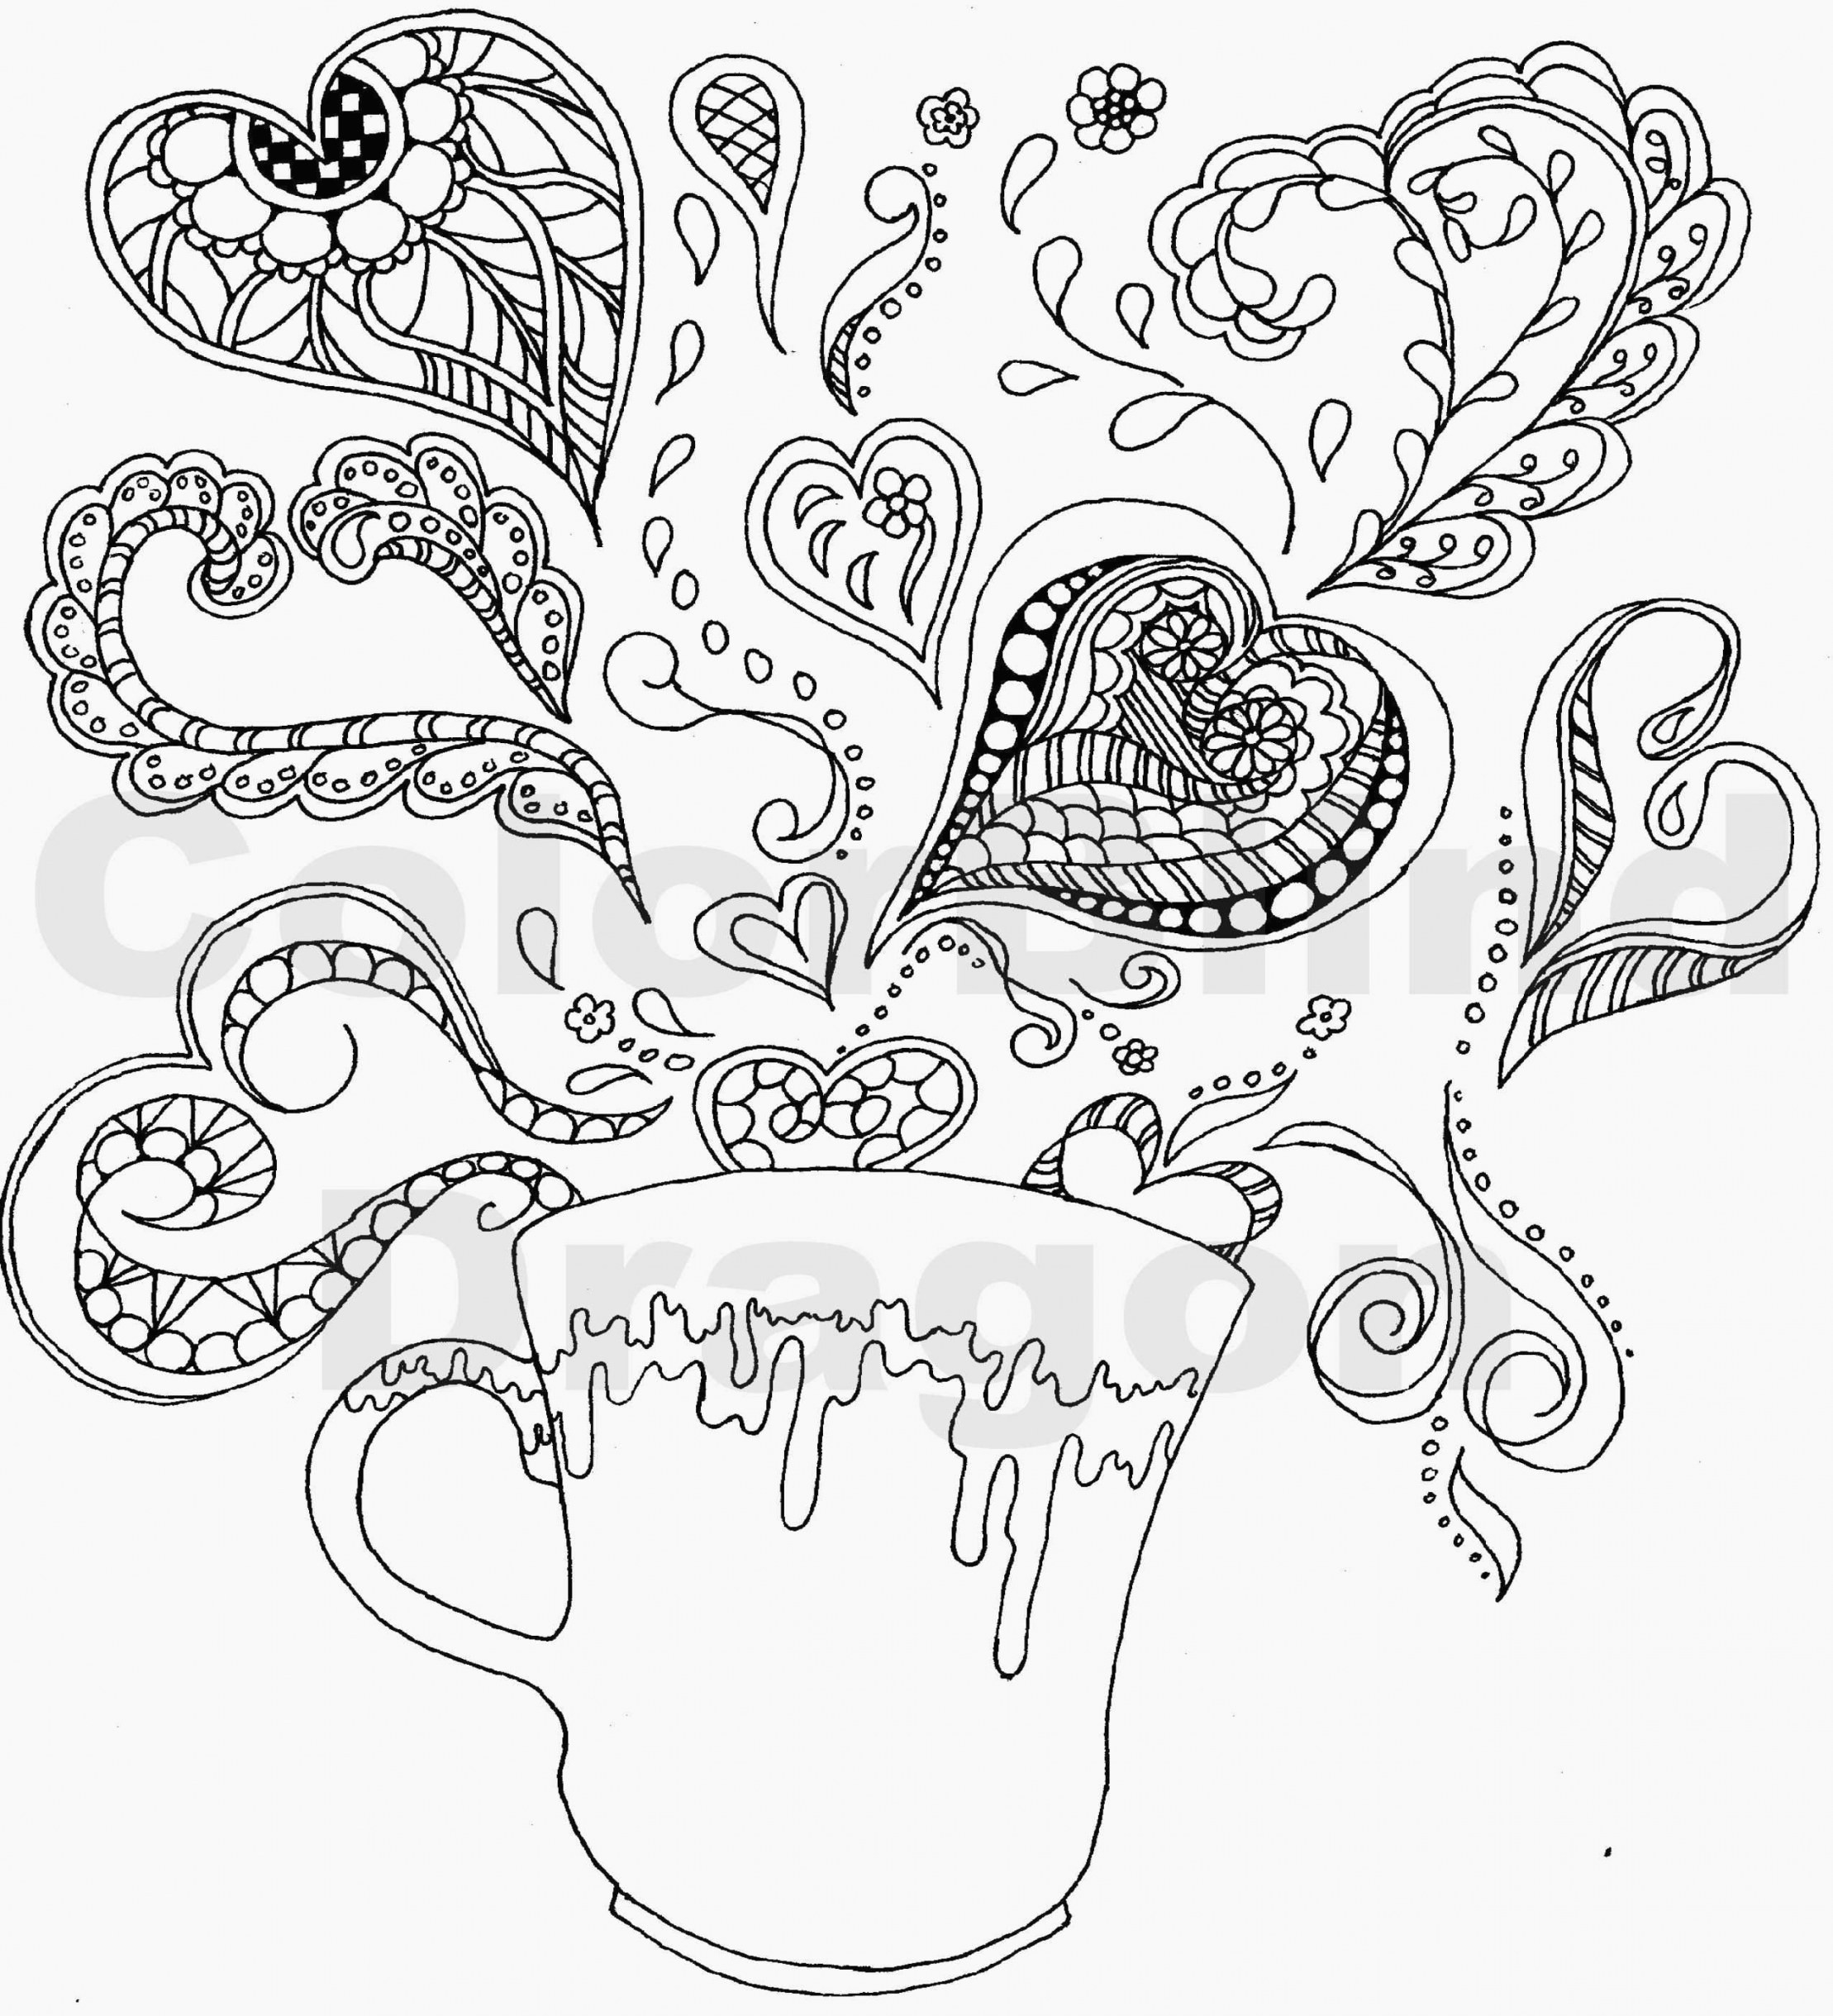 patterns to draw new easy flower coloring of patterns to draw 1 jpg